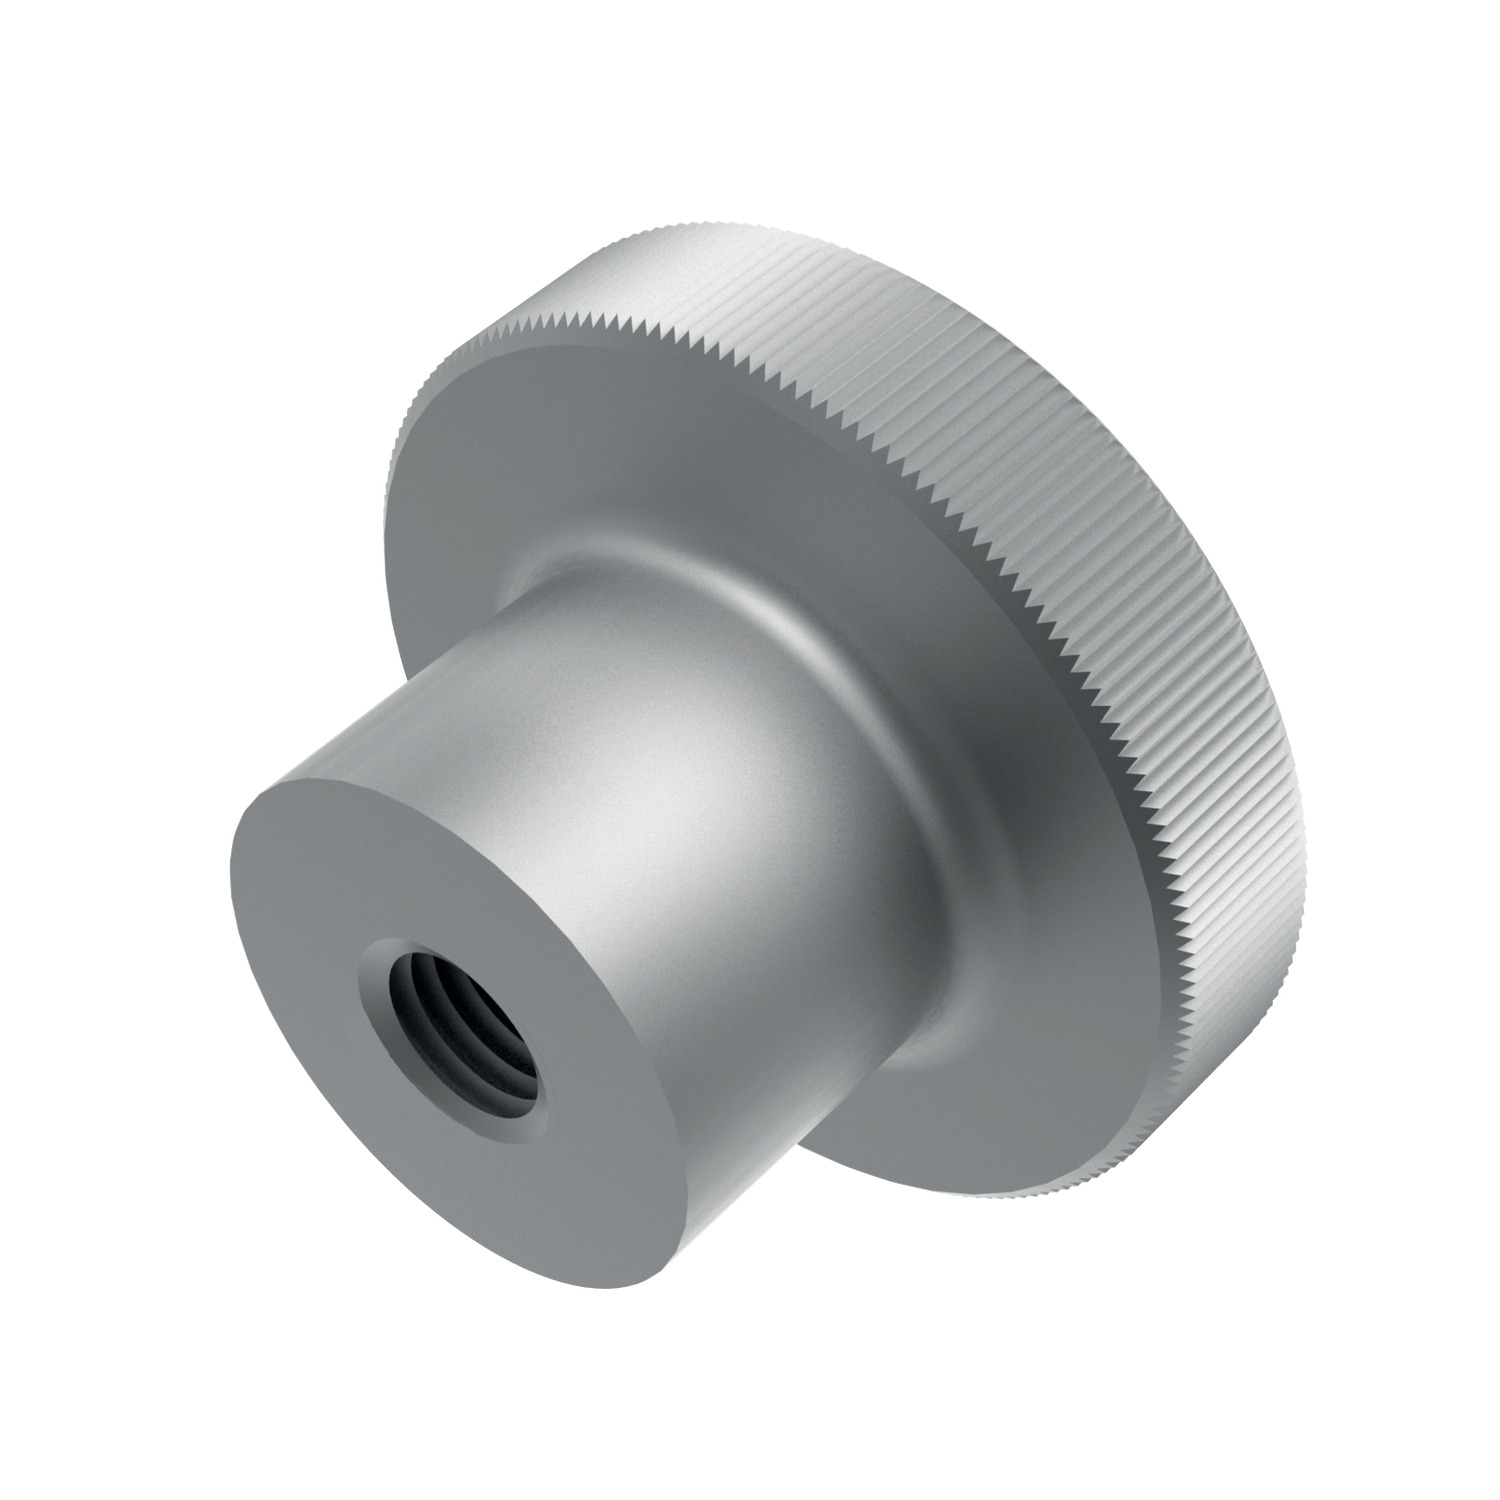 P0403.A2 - Knurled Thumb Nuts